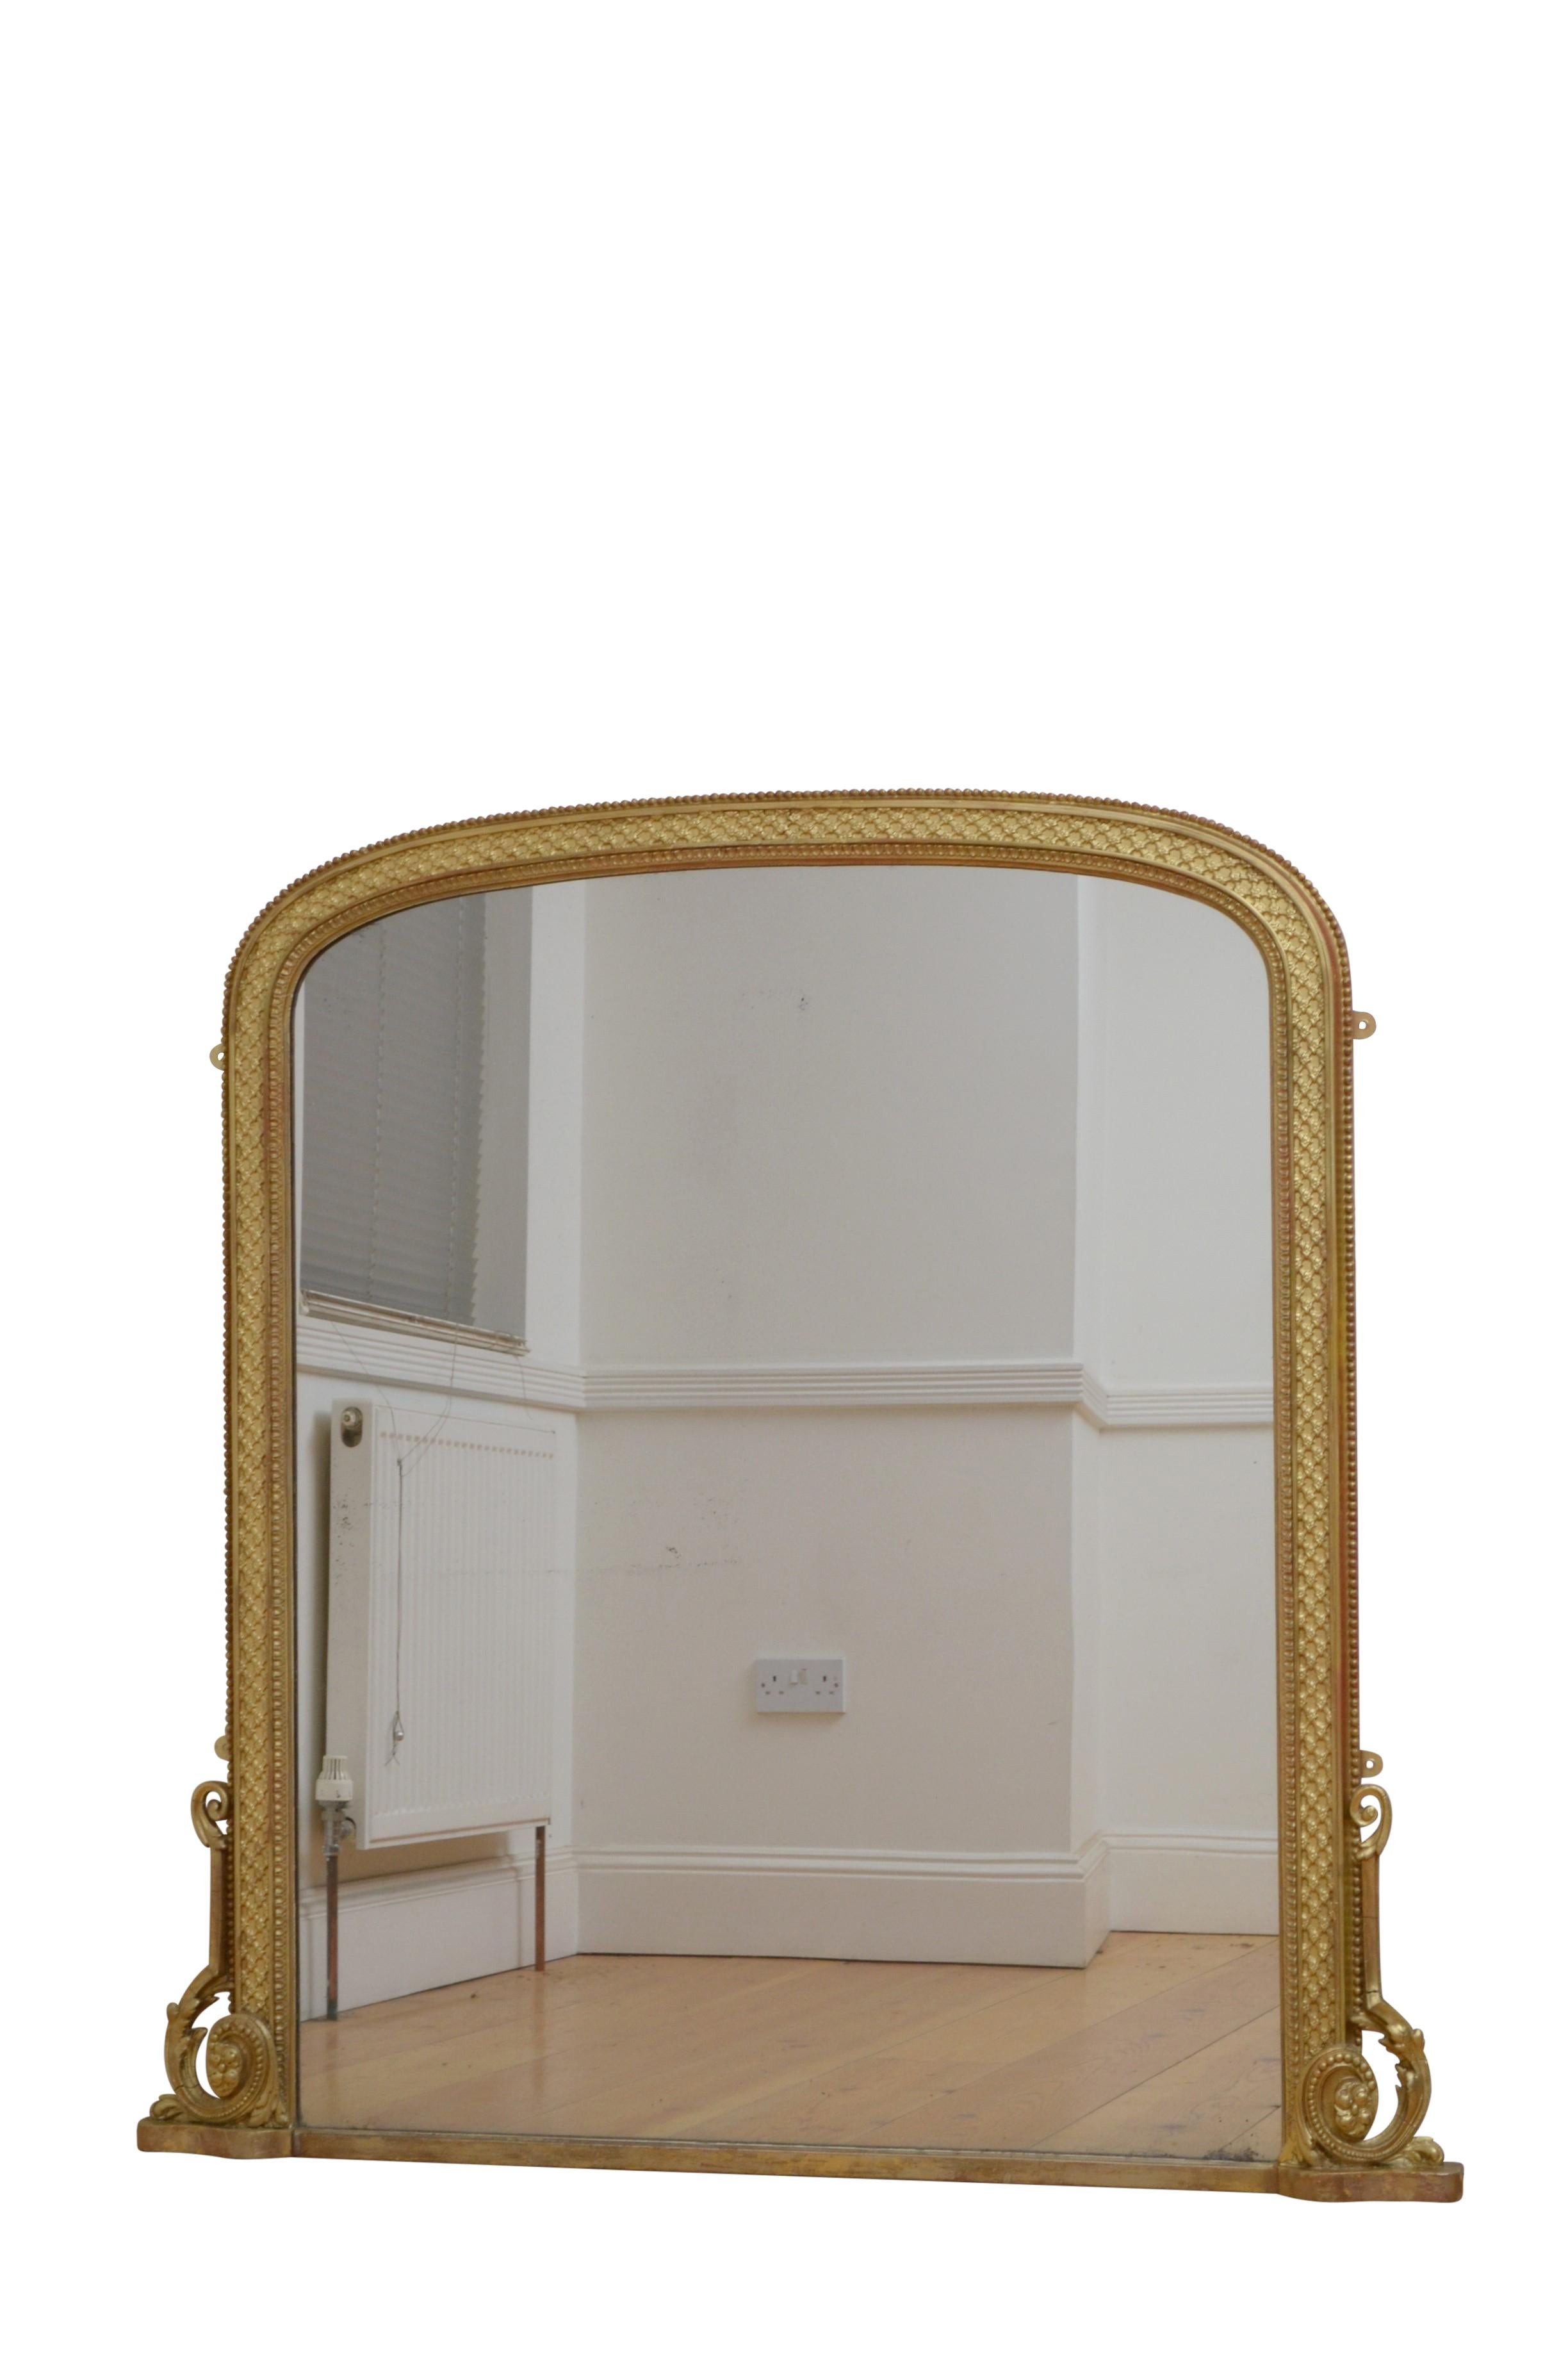 0585 Superb English gilded overmantel mirror, having original mercury glass with desirable sparkle and foxing in beaded gilded frame with lattice work and leafy scrolls to the base. This antique mirror retains its original glass, original gilt with